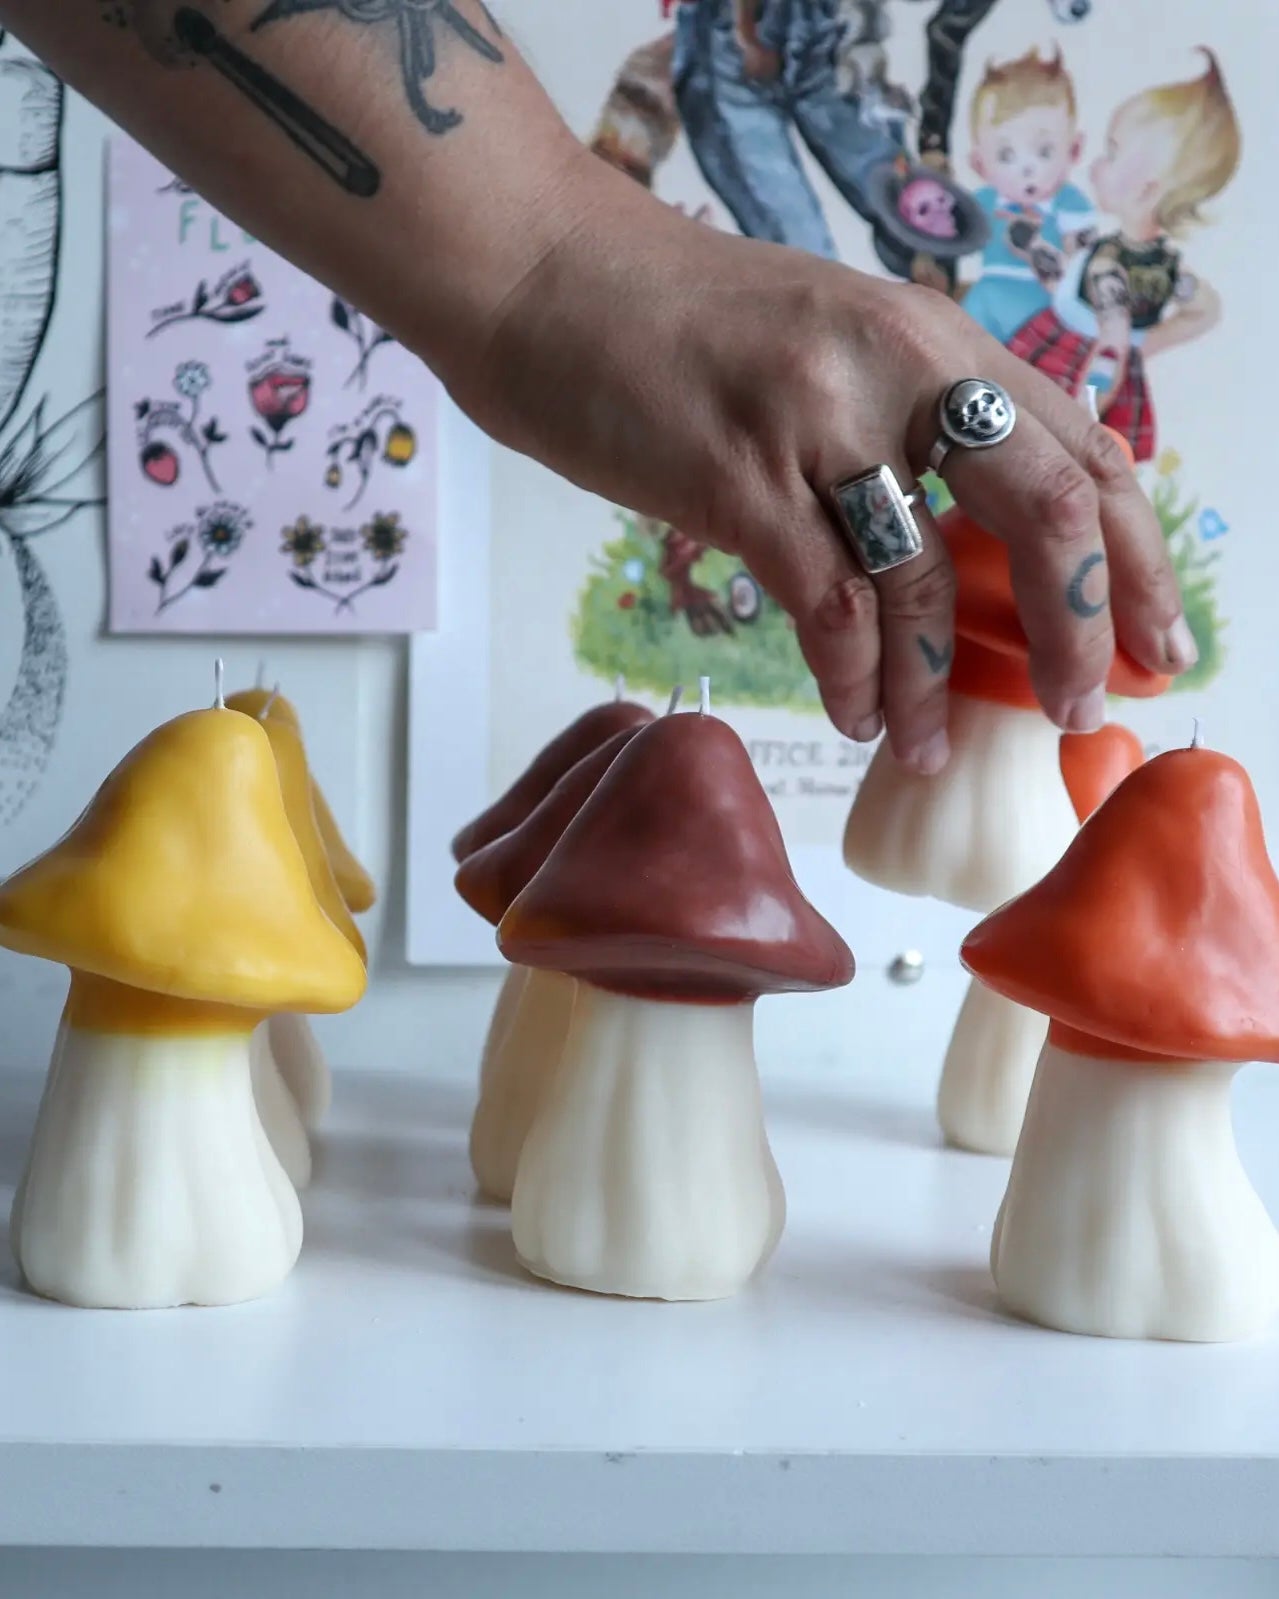 a hand reaching for the Drop Dead Retro Mushroom Candle in a line up of candles